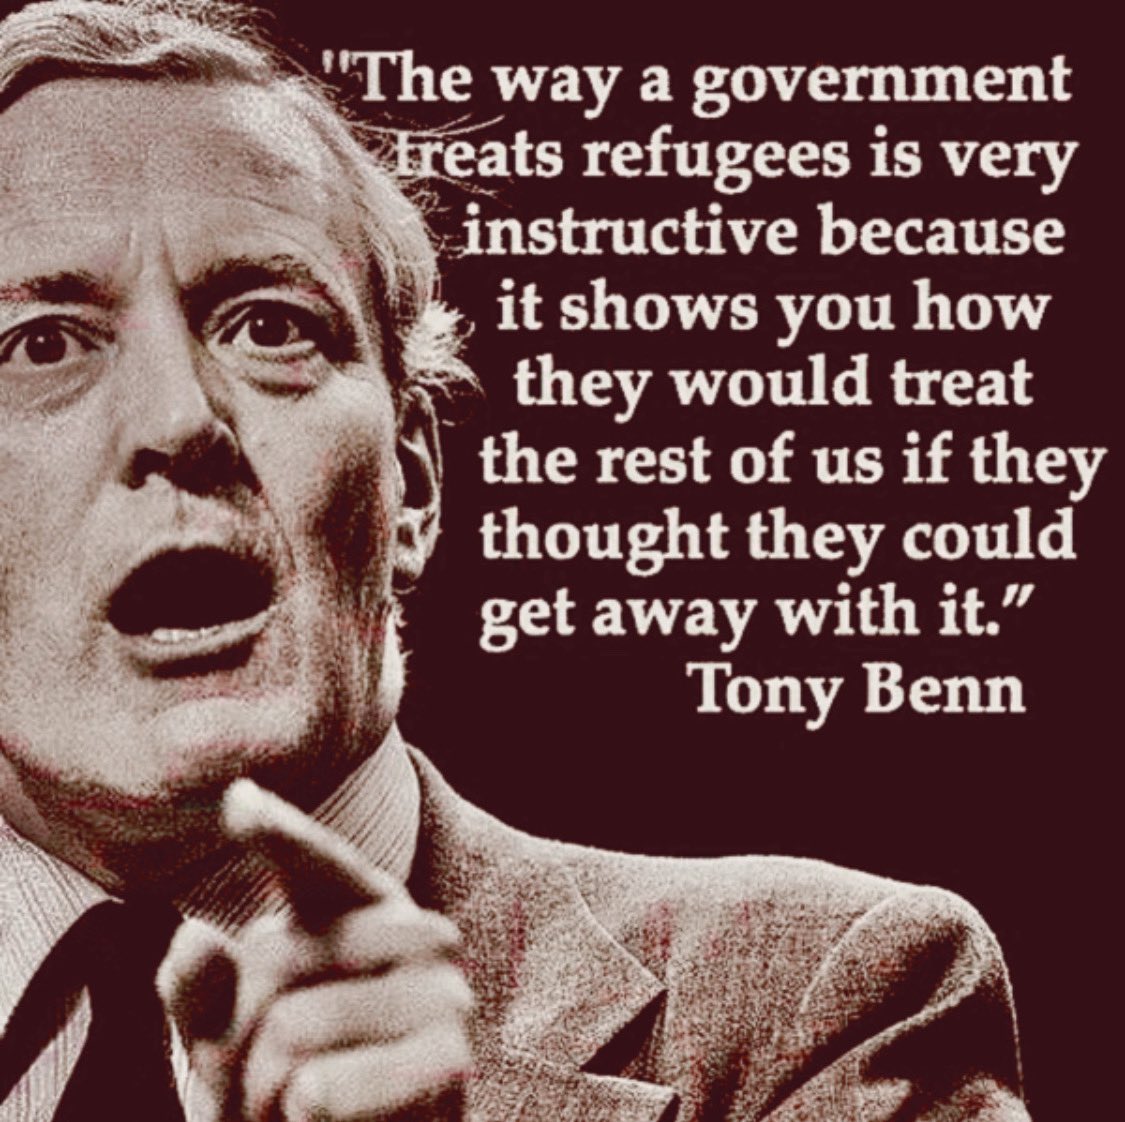 The late great  #TonyBenn.
He was right then and even more right today!👇

“The way a government
treats #refugees is very
instructive because
it shows you how
they would treat
the rest of us if they
thought they could
get away with it.'